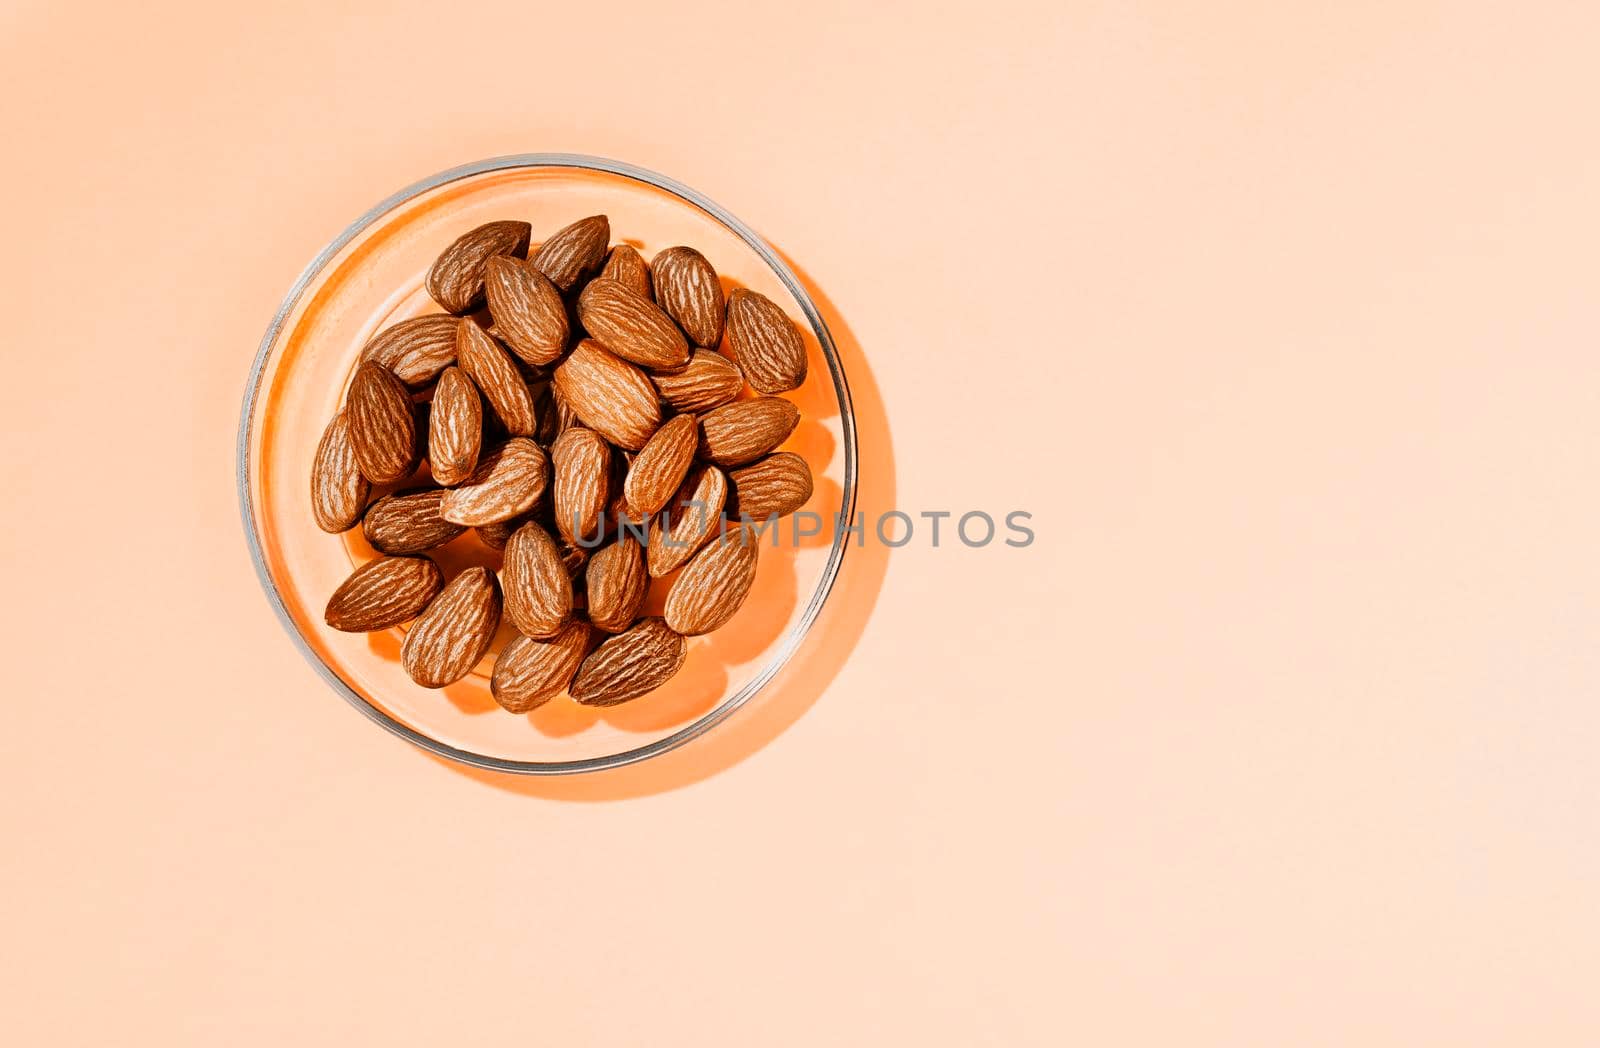 Heap of brown shelled almonds on glass plate